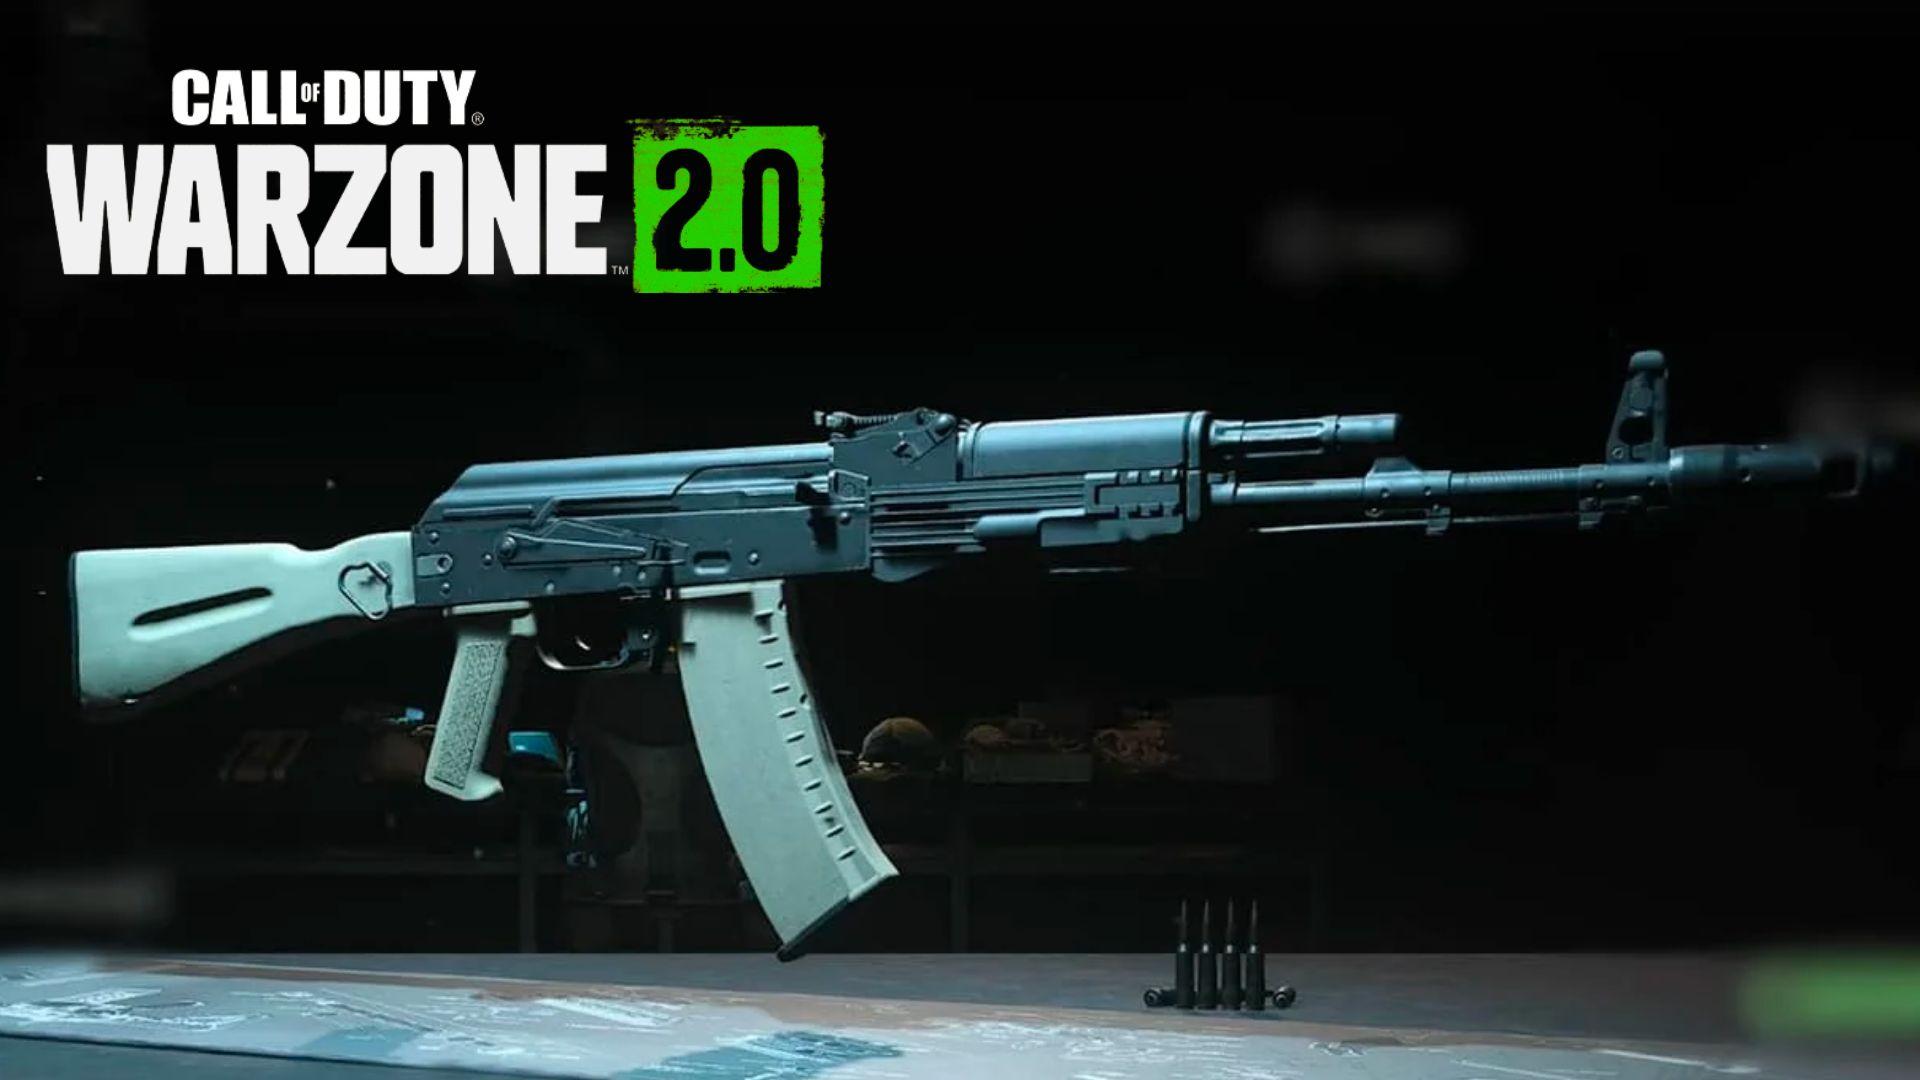 Weapons Expert Reacts to the AK-47 In Counter-Strike, Warzone and More